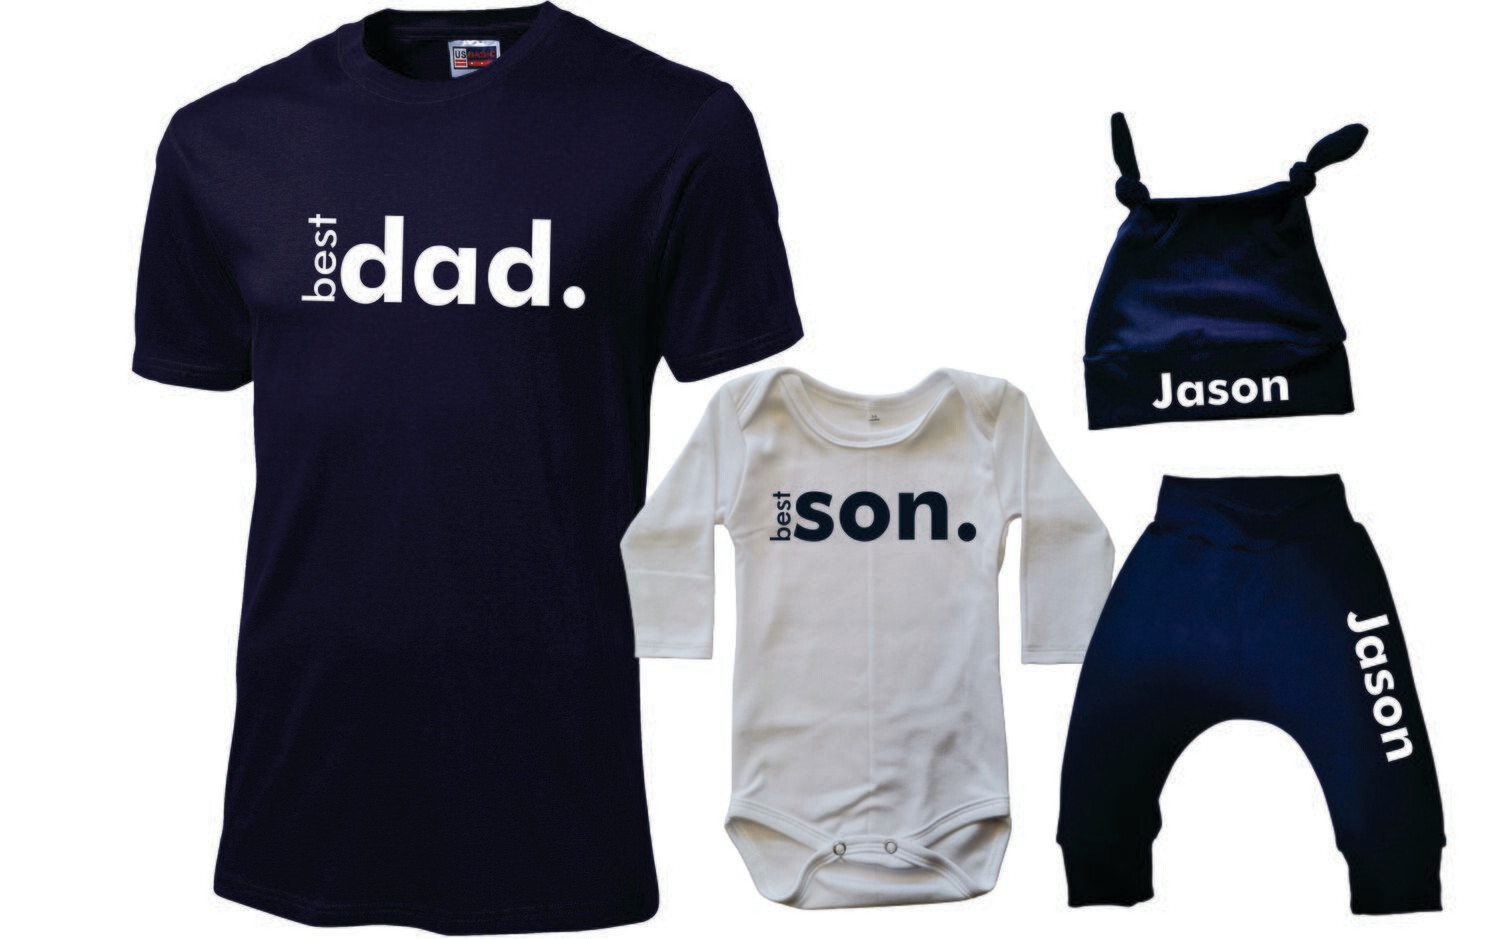 Father's Day Shirt and Baby Set